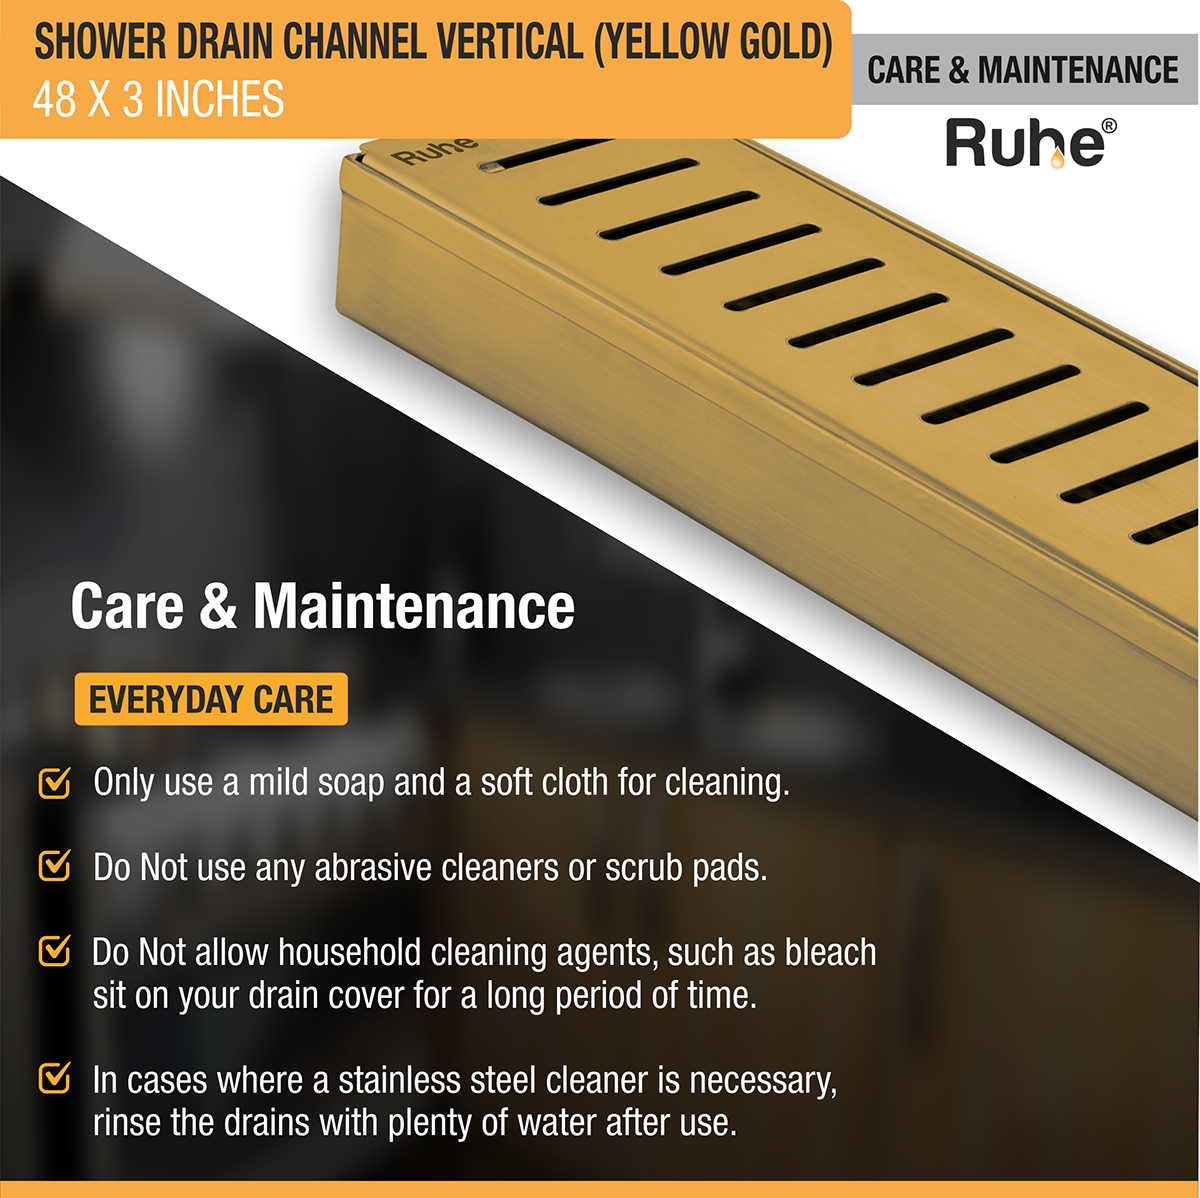 Vertical Shower Drain Channel (48 x 3 Inches) YELLOW GOLD care and maintenance